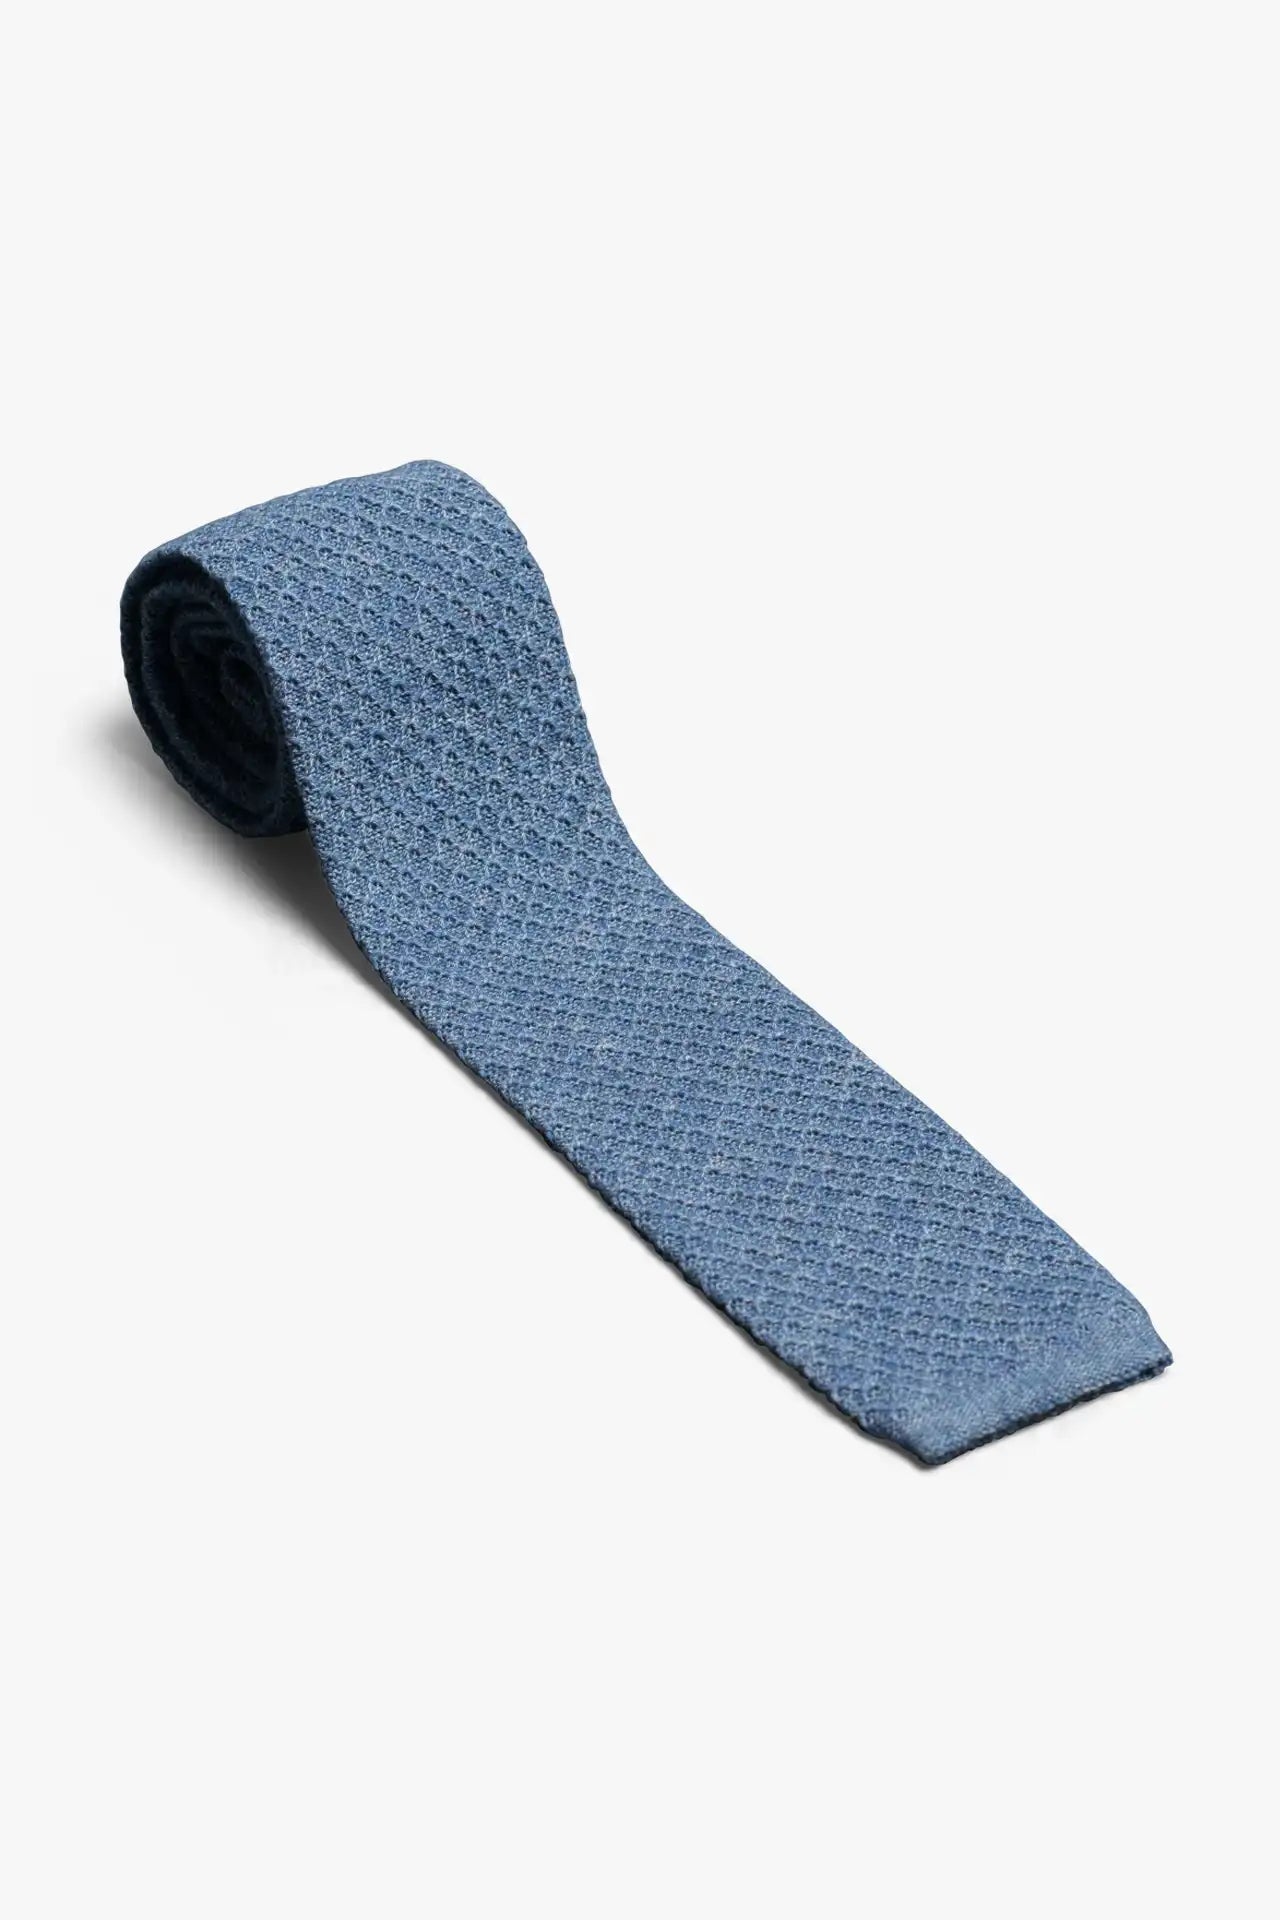 Blue cotton knitted tie with matching pocket square.  Minimalist Swedish design made in Italy. 